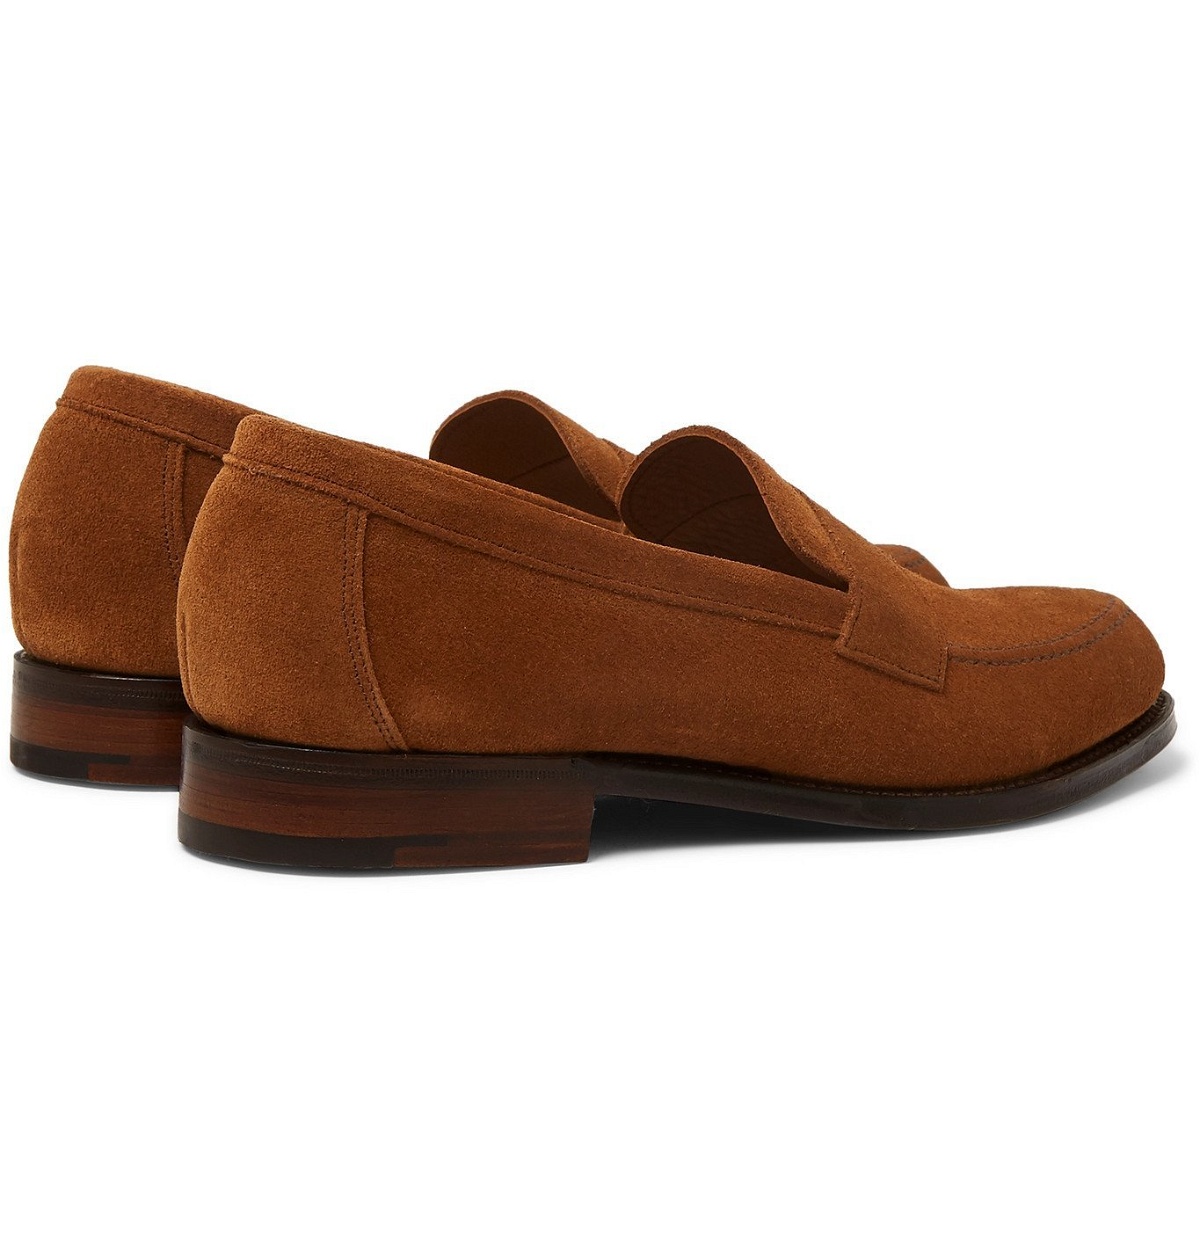 Cheaney - Hadley Suede Penny Loafers - Brown Cheaney